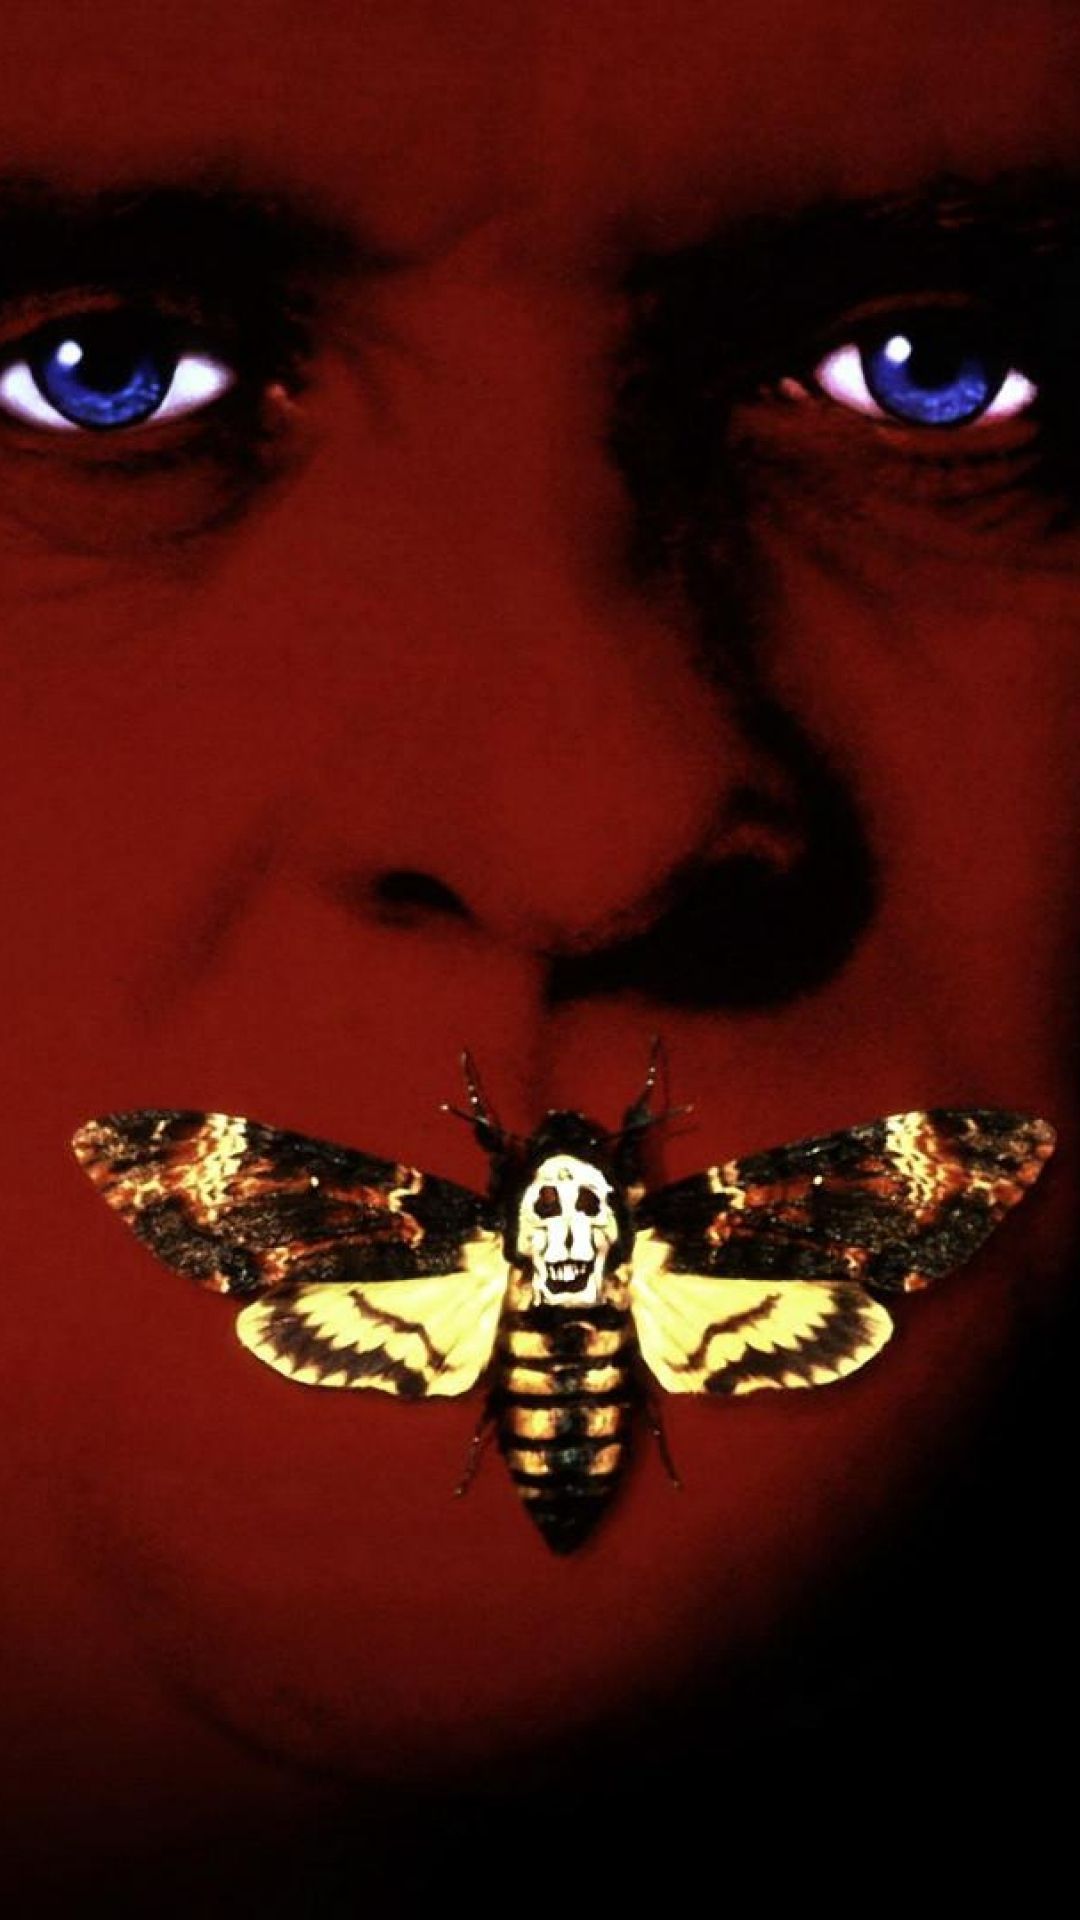 Download Wallpaper 1080x1920 The silence of the lambs, Butterflies ...